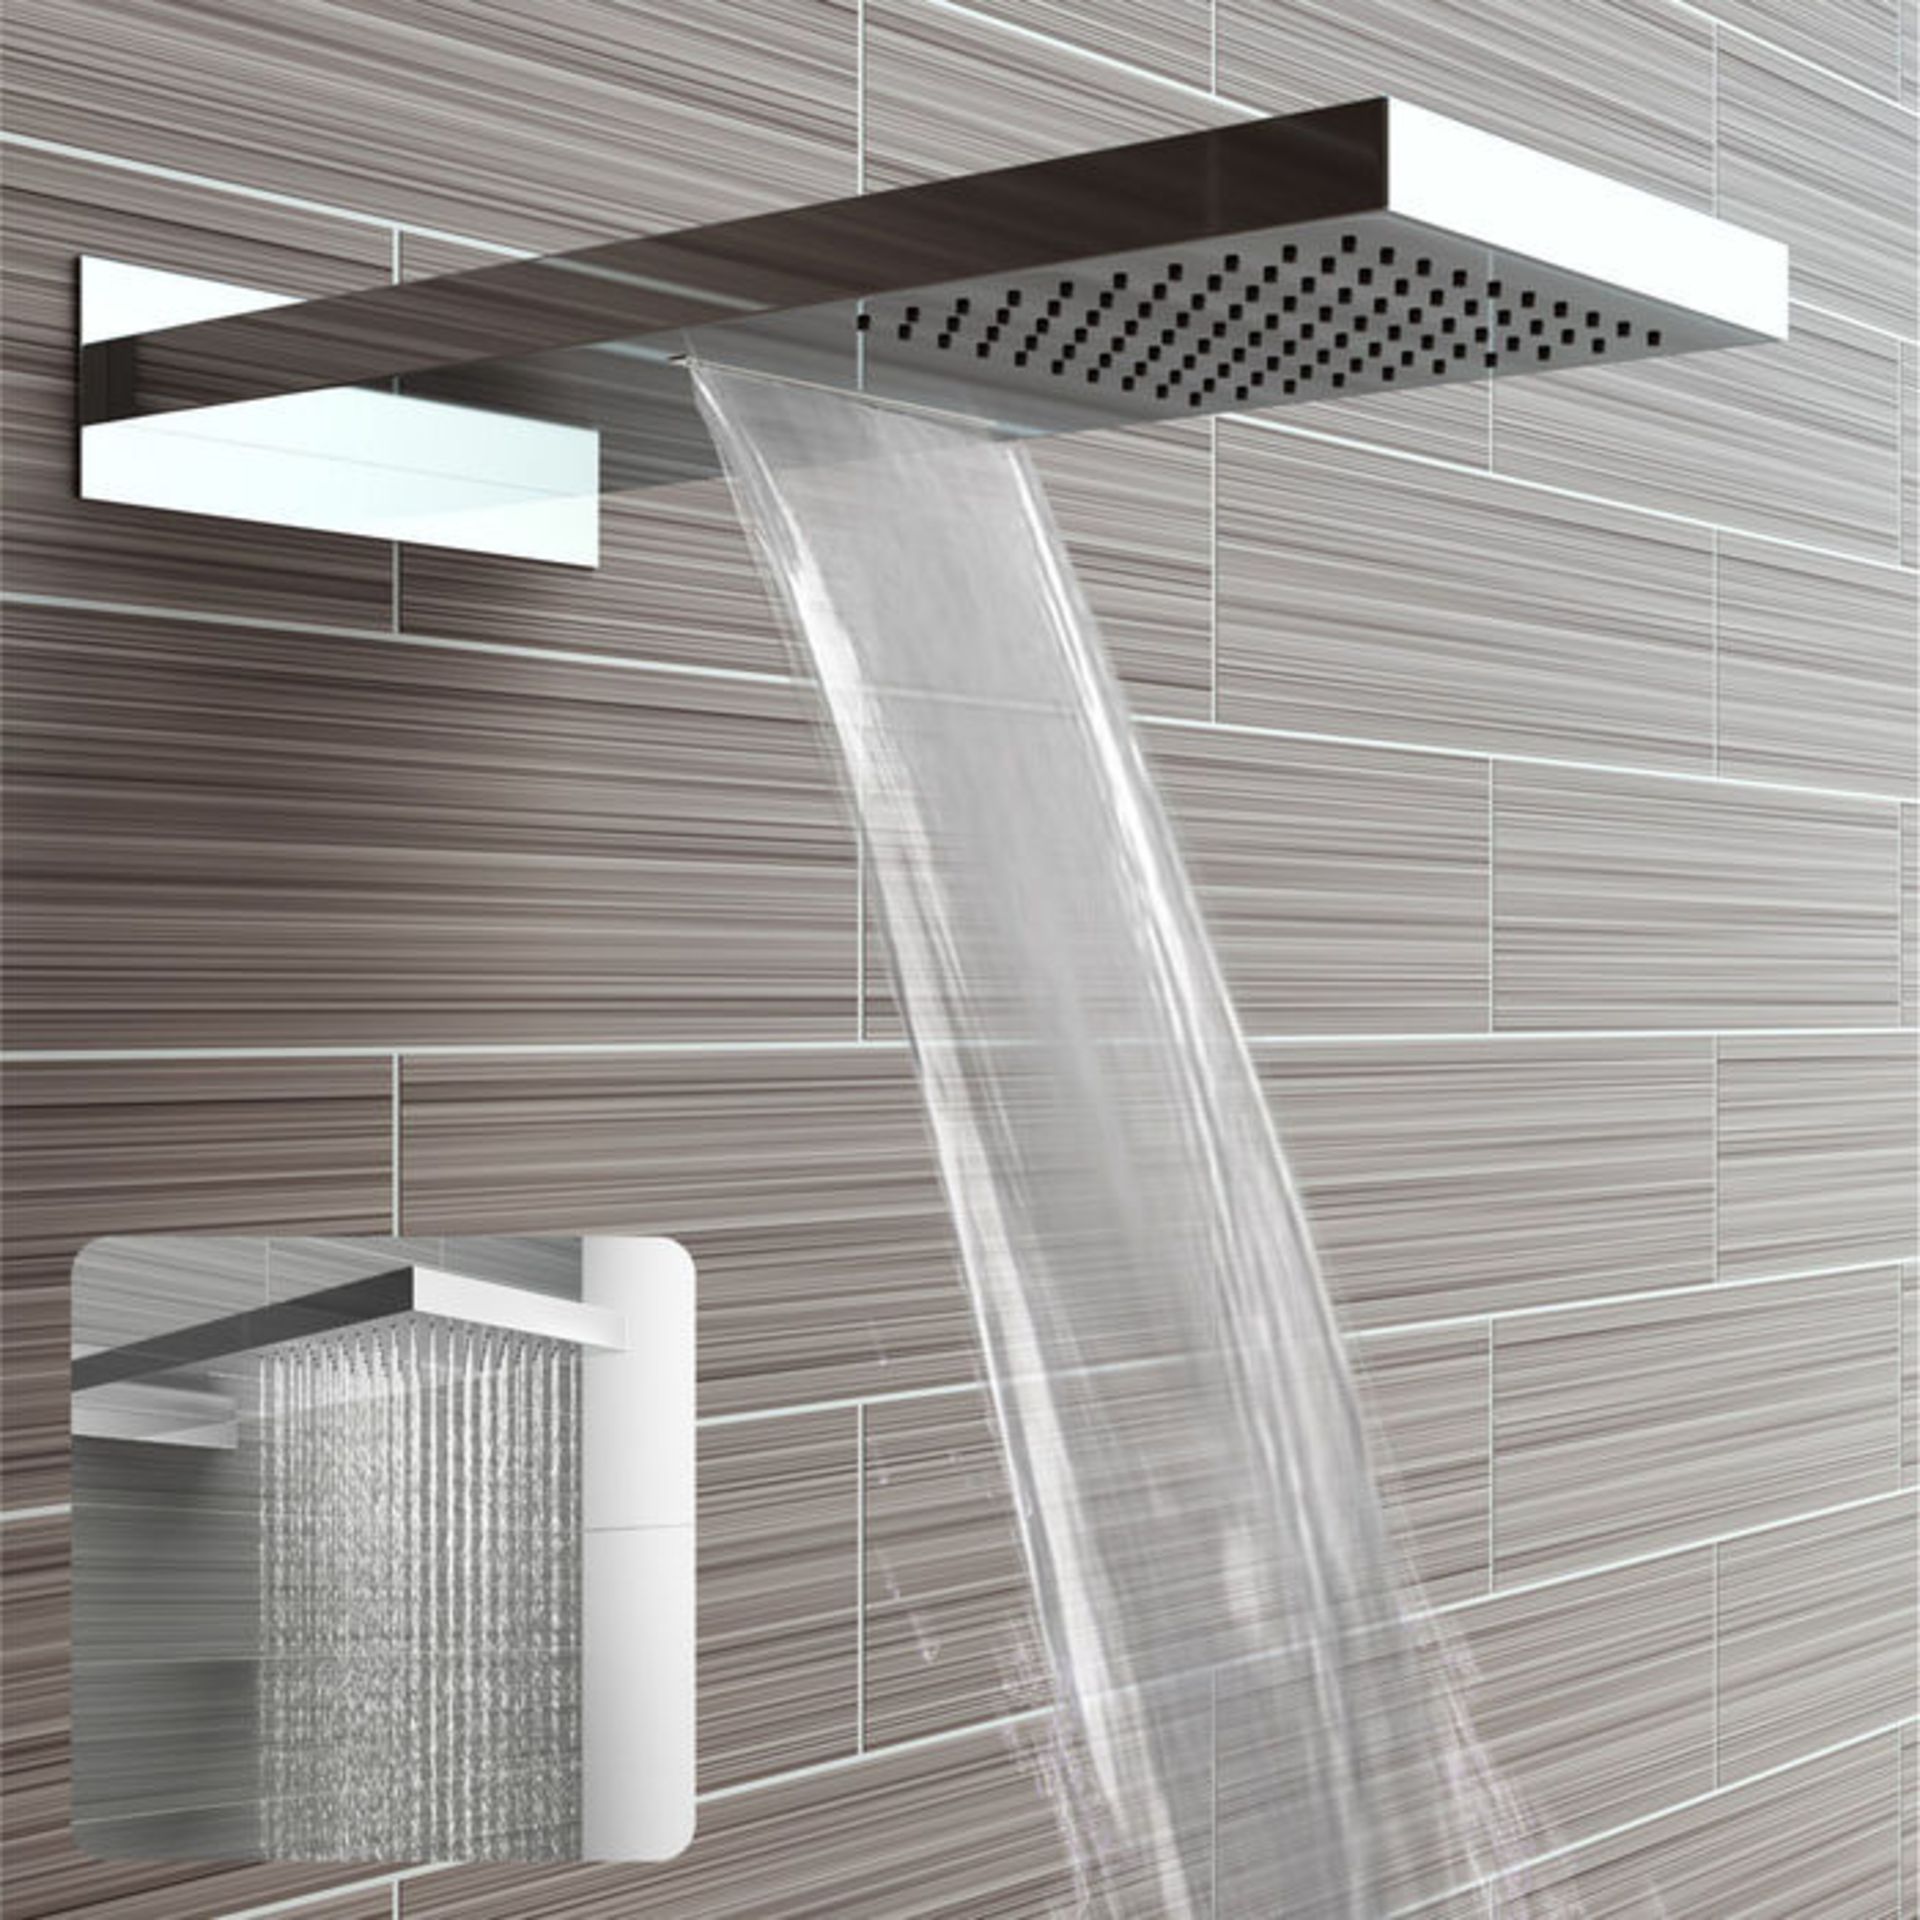 (L27) Stainless Steel 230x500mm Waterfall Shower Head RRP £374.99 Dual function waterfall and - Image 2 of 3